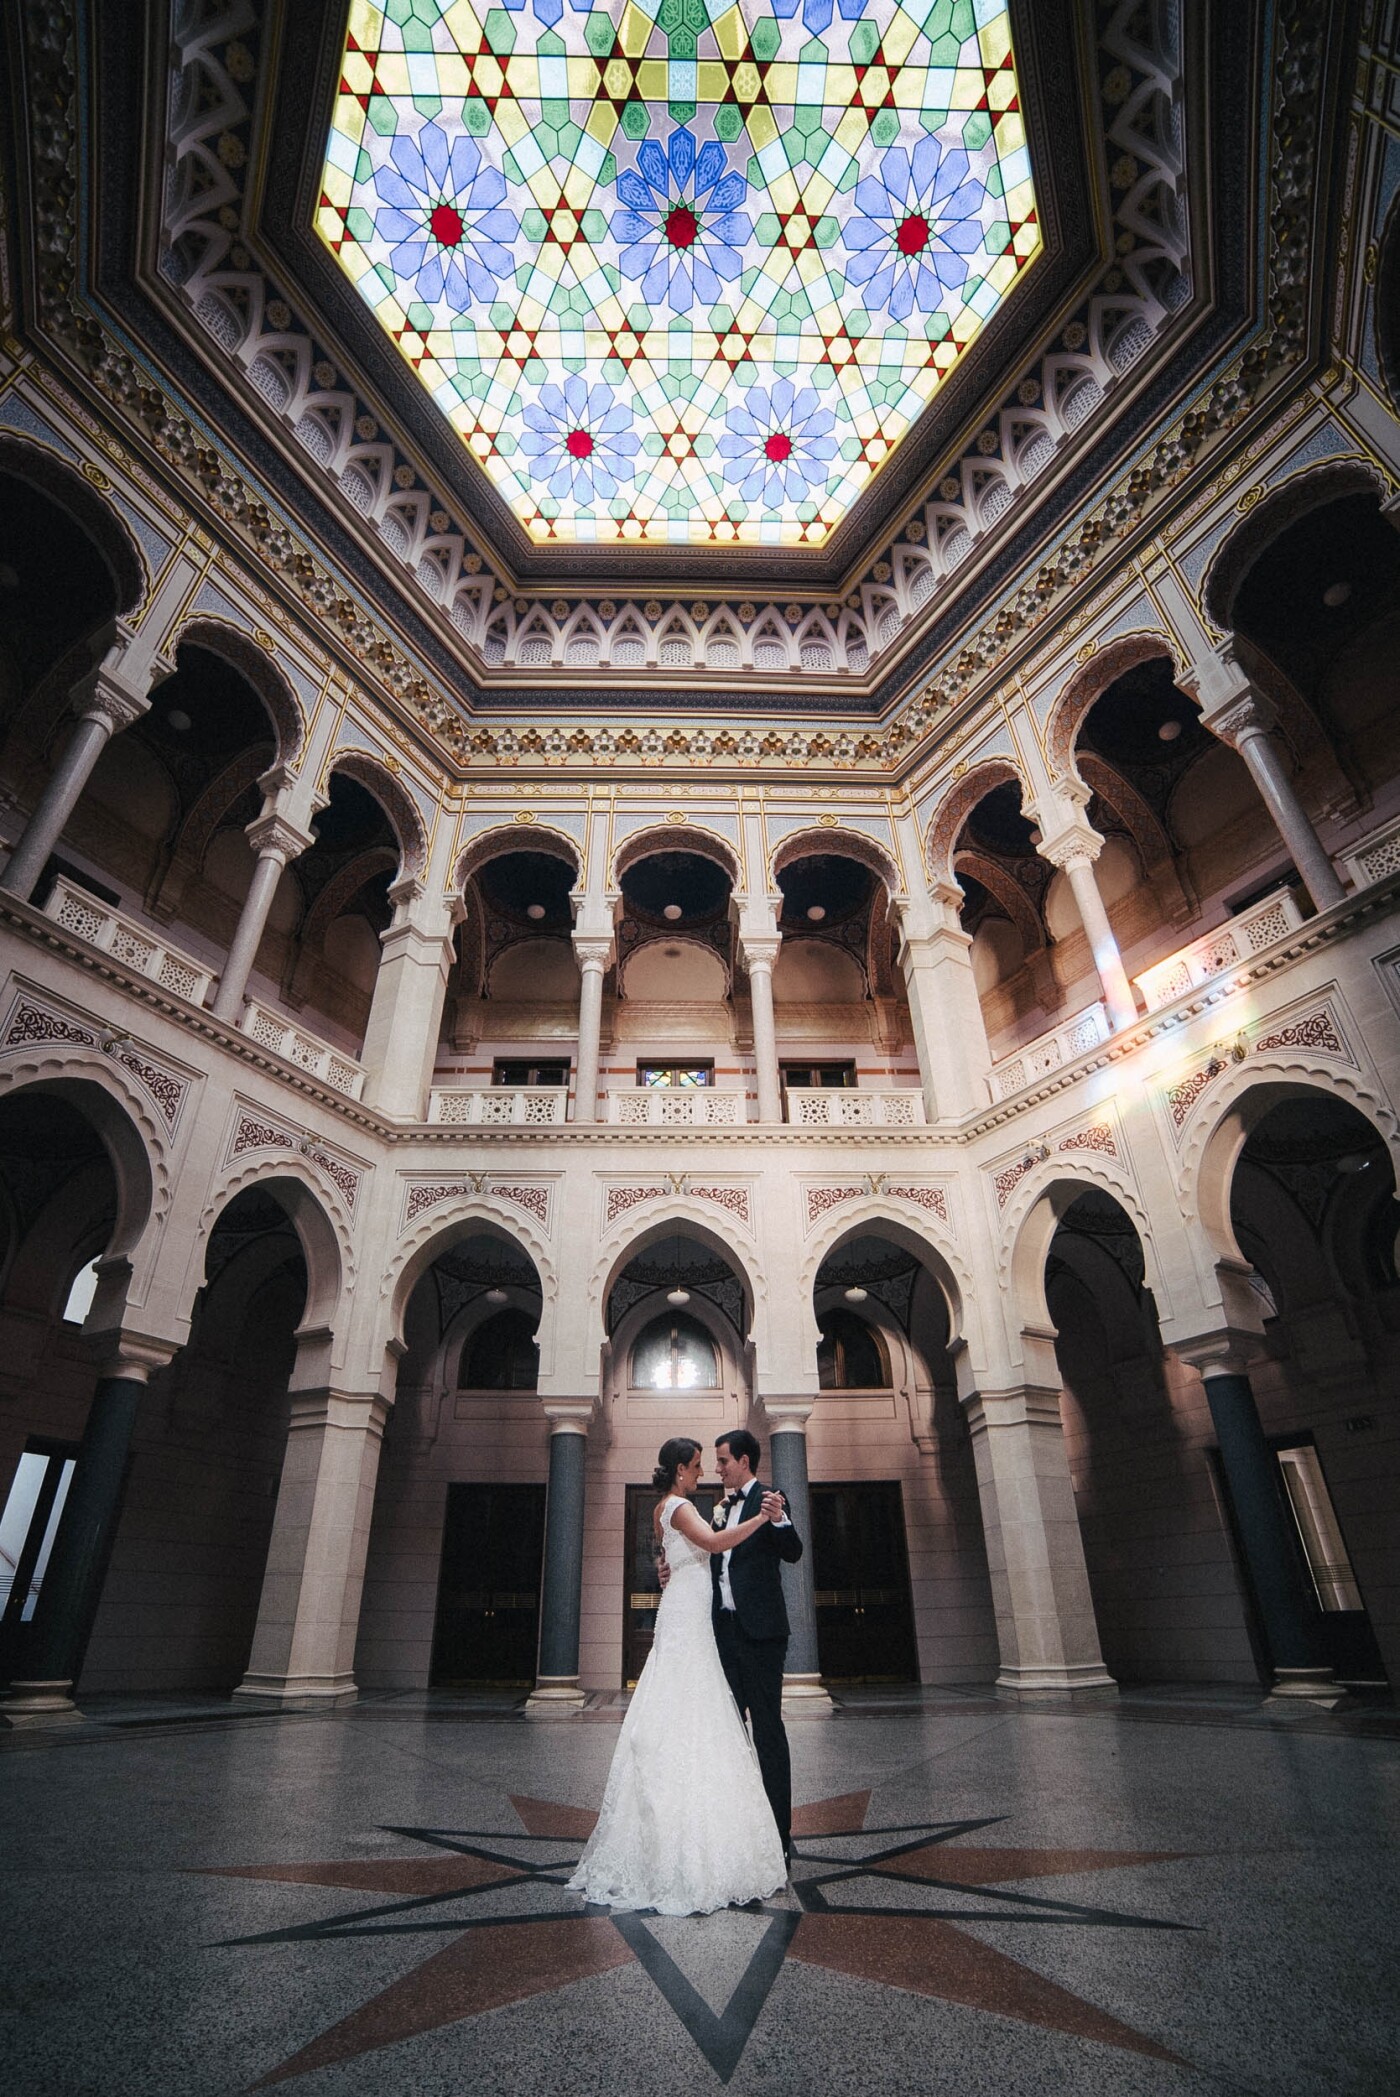 The photo was taken in the Sarajevo City Hall, an old neo-moorish architecture building. We were lucky to be allowed to have a photosession there after closing time, so it was empty, as soon as we entered I had the idea to show the architecture around the bride and groom dancing. So I used my 14mm lens on a full frame camera to get the perspective and the wide shot. I needed an ultra-wide lens to catch them dancing as well as the colorful glass roof.